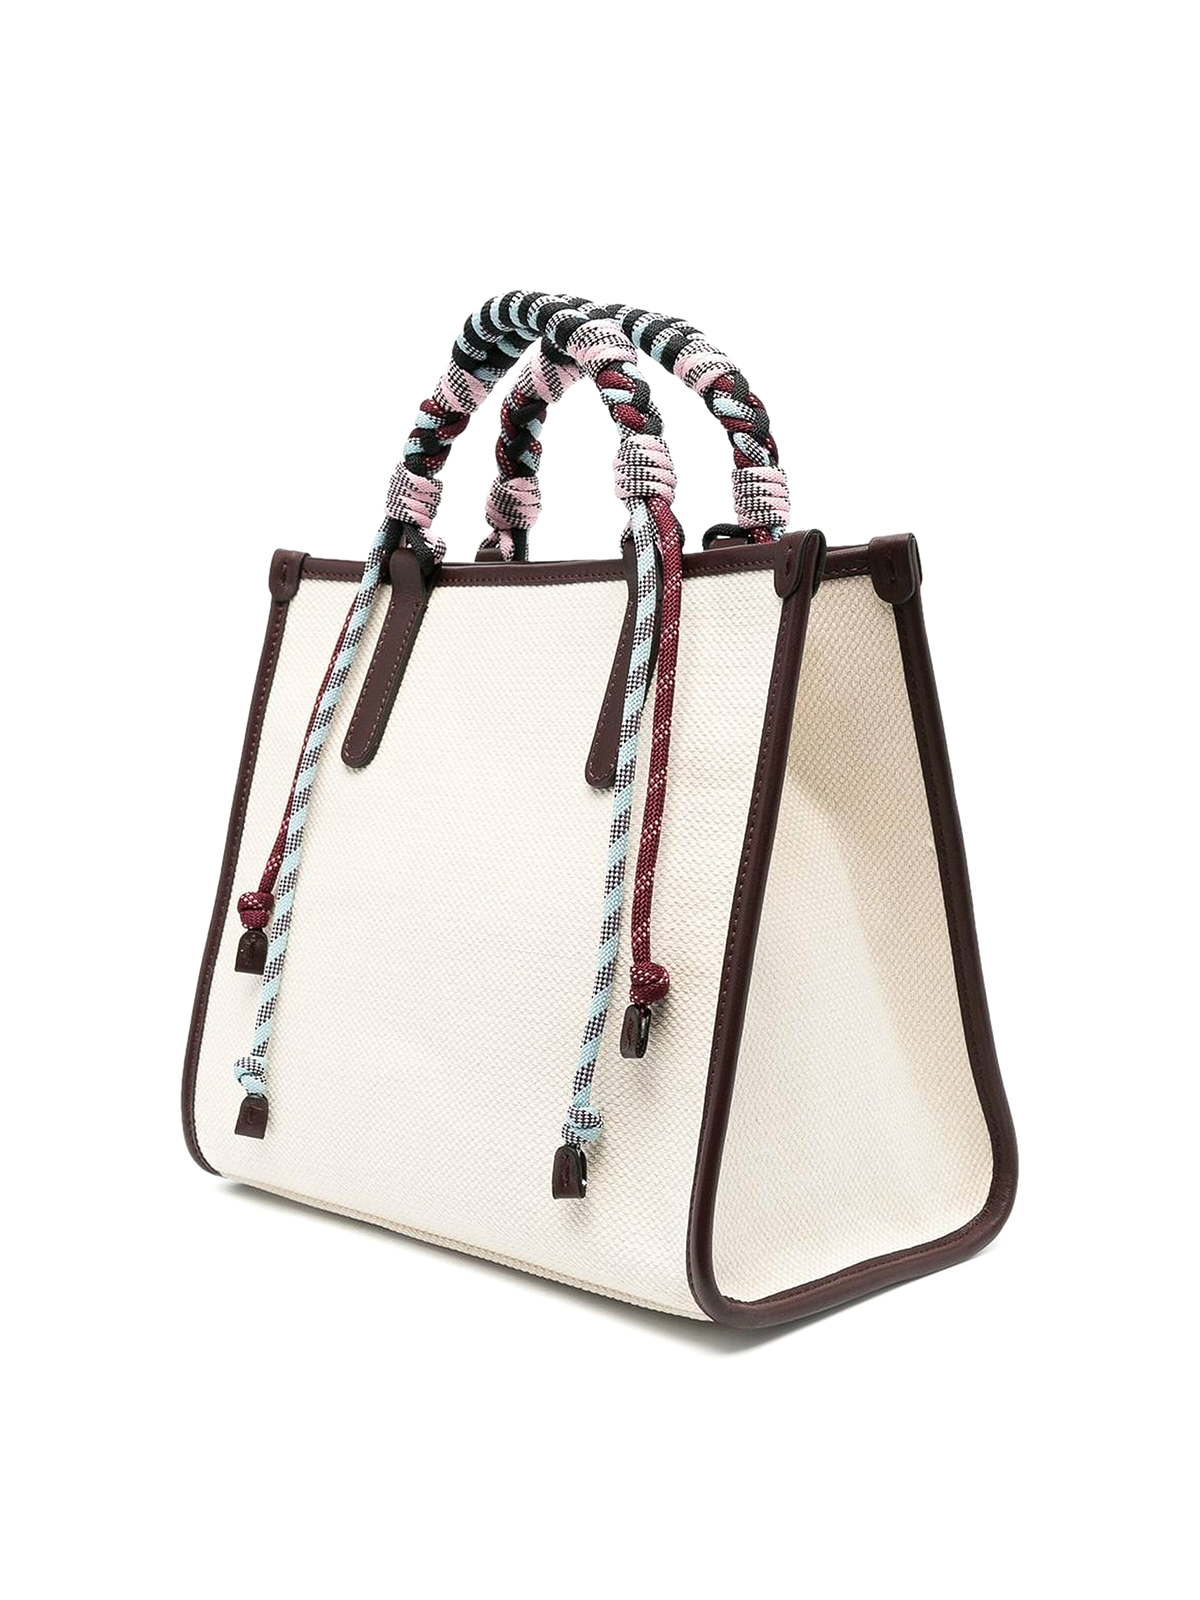 Totes bags Etro - Canvas bag with logo and woven handles - 1N8957090800